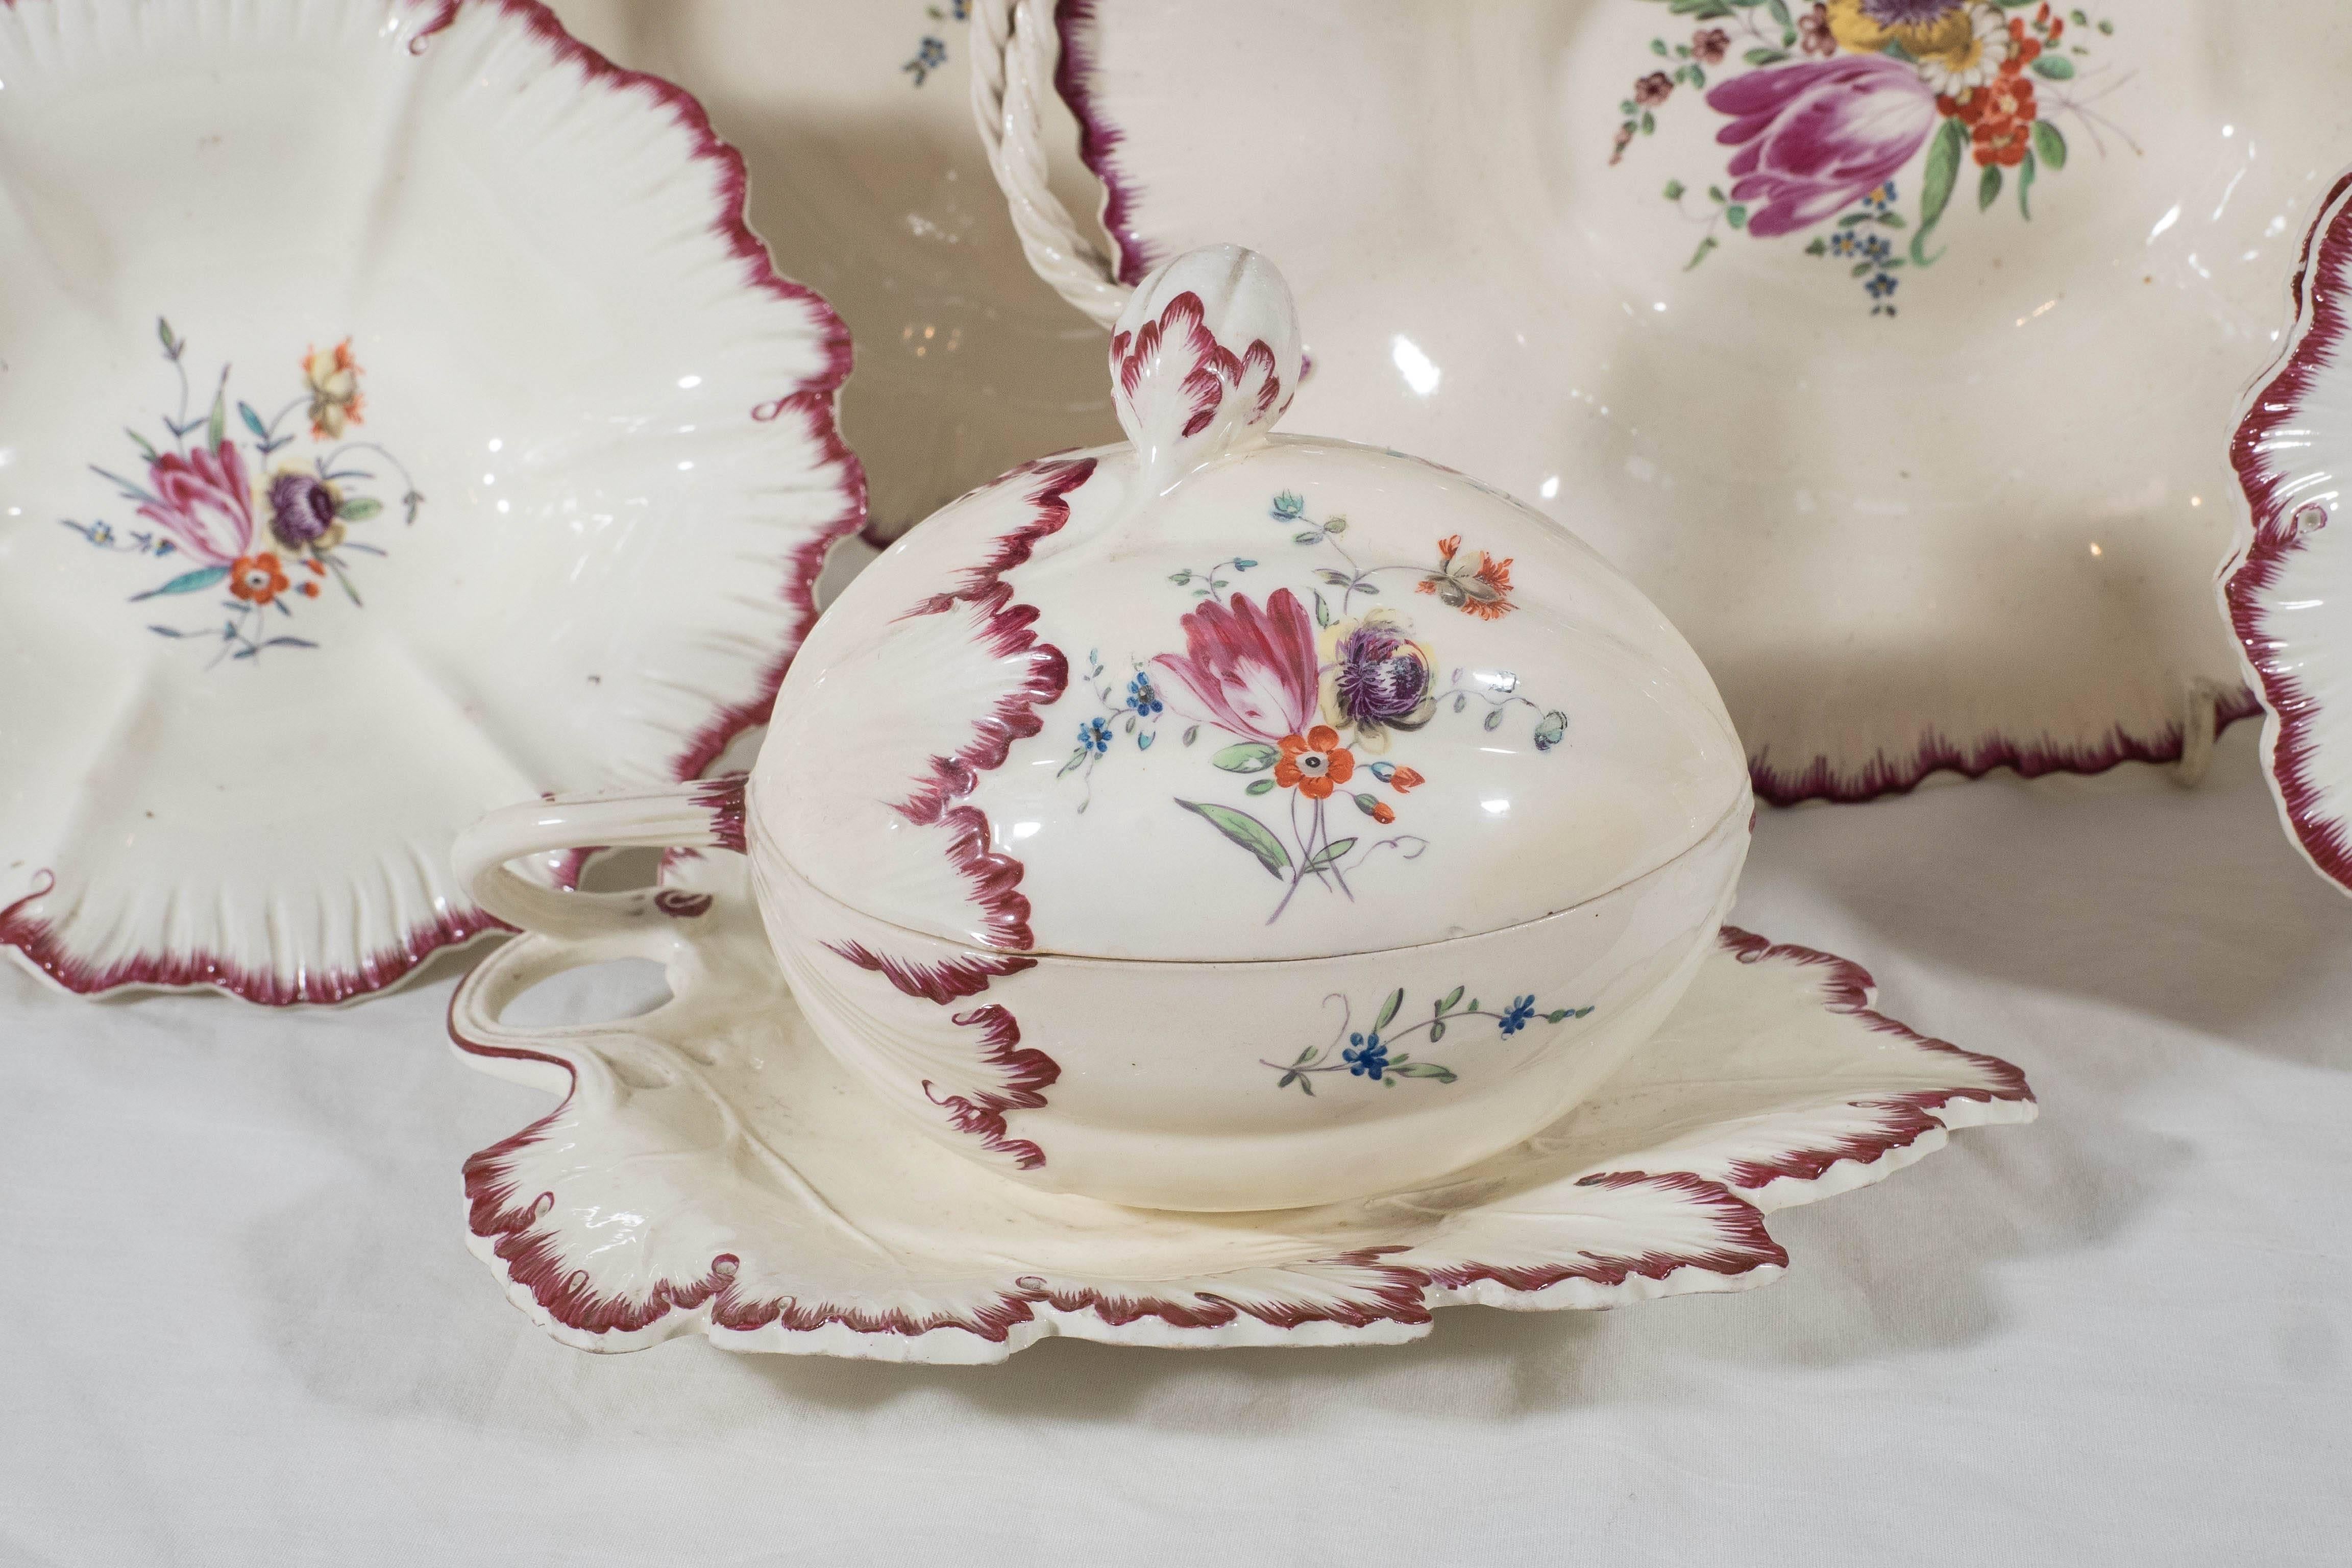 An extensive 18th century creamware dessert set hand-painted with sprays of colorful flowers. Decorated with a beautiful claret colored shell edge rim. Made in England by Neale and Co., circa 1780. It is rare to find a large 18th century creamware